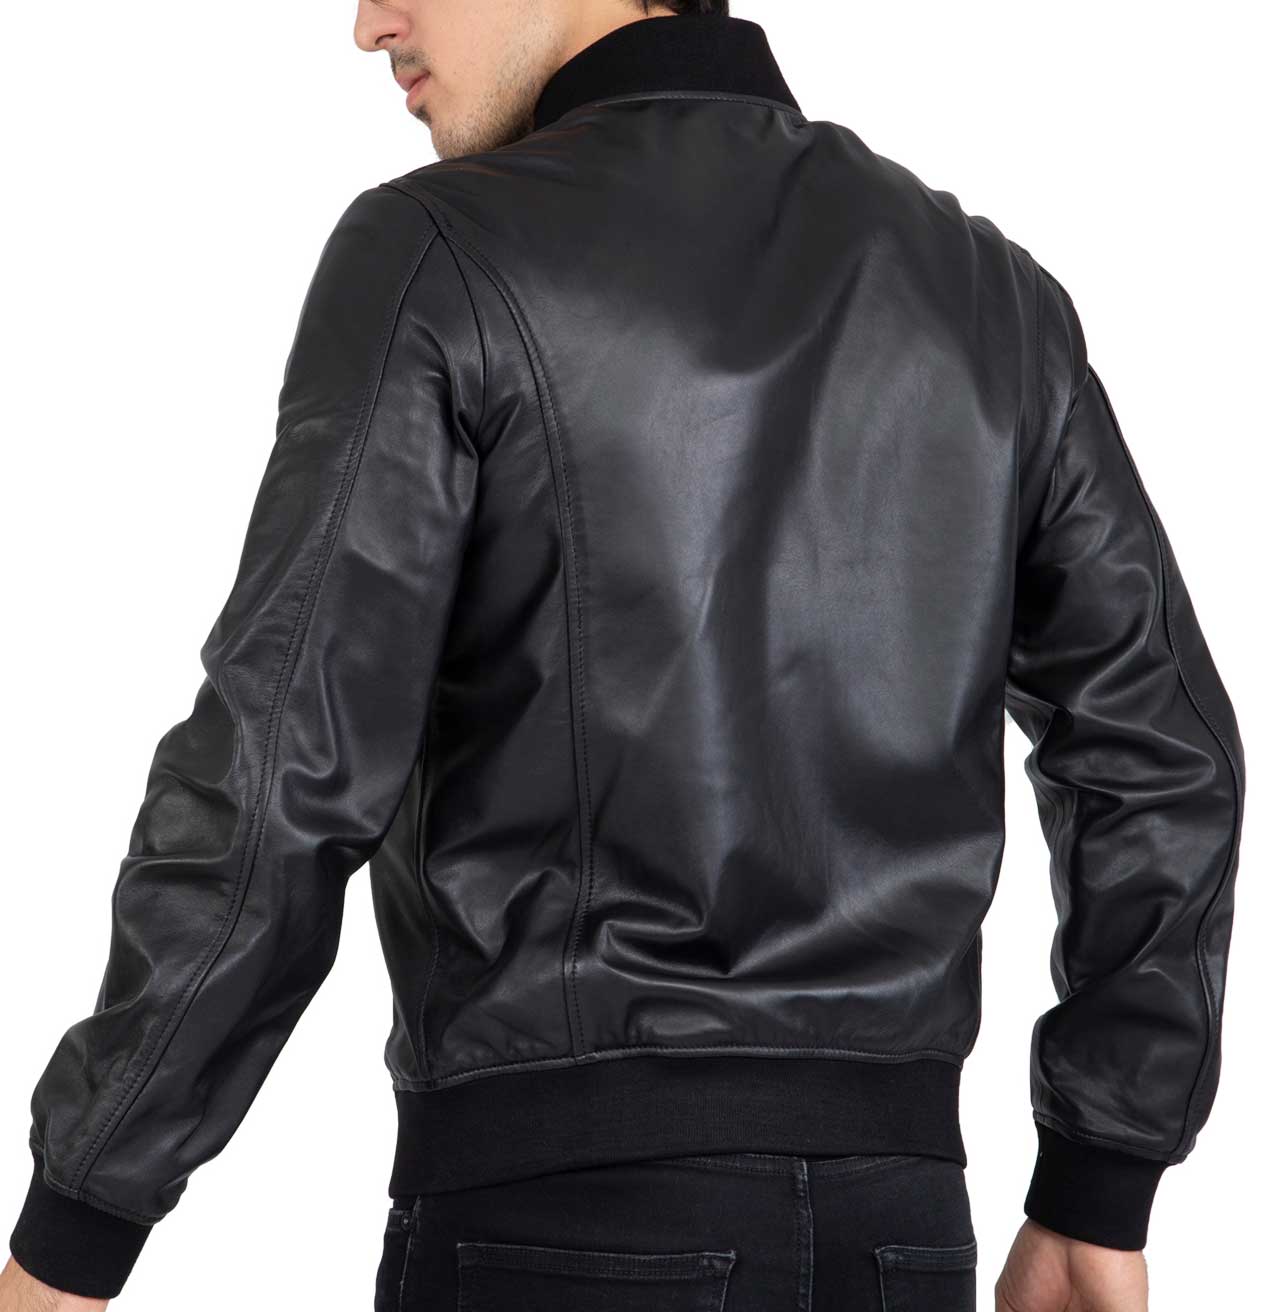 Theo&Ash - Buy leather jackets online for Men | Designer leather jackets  for men in India | Custom made leather jackets online